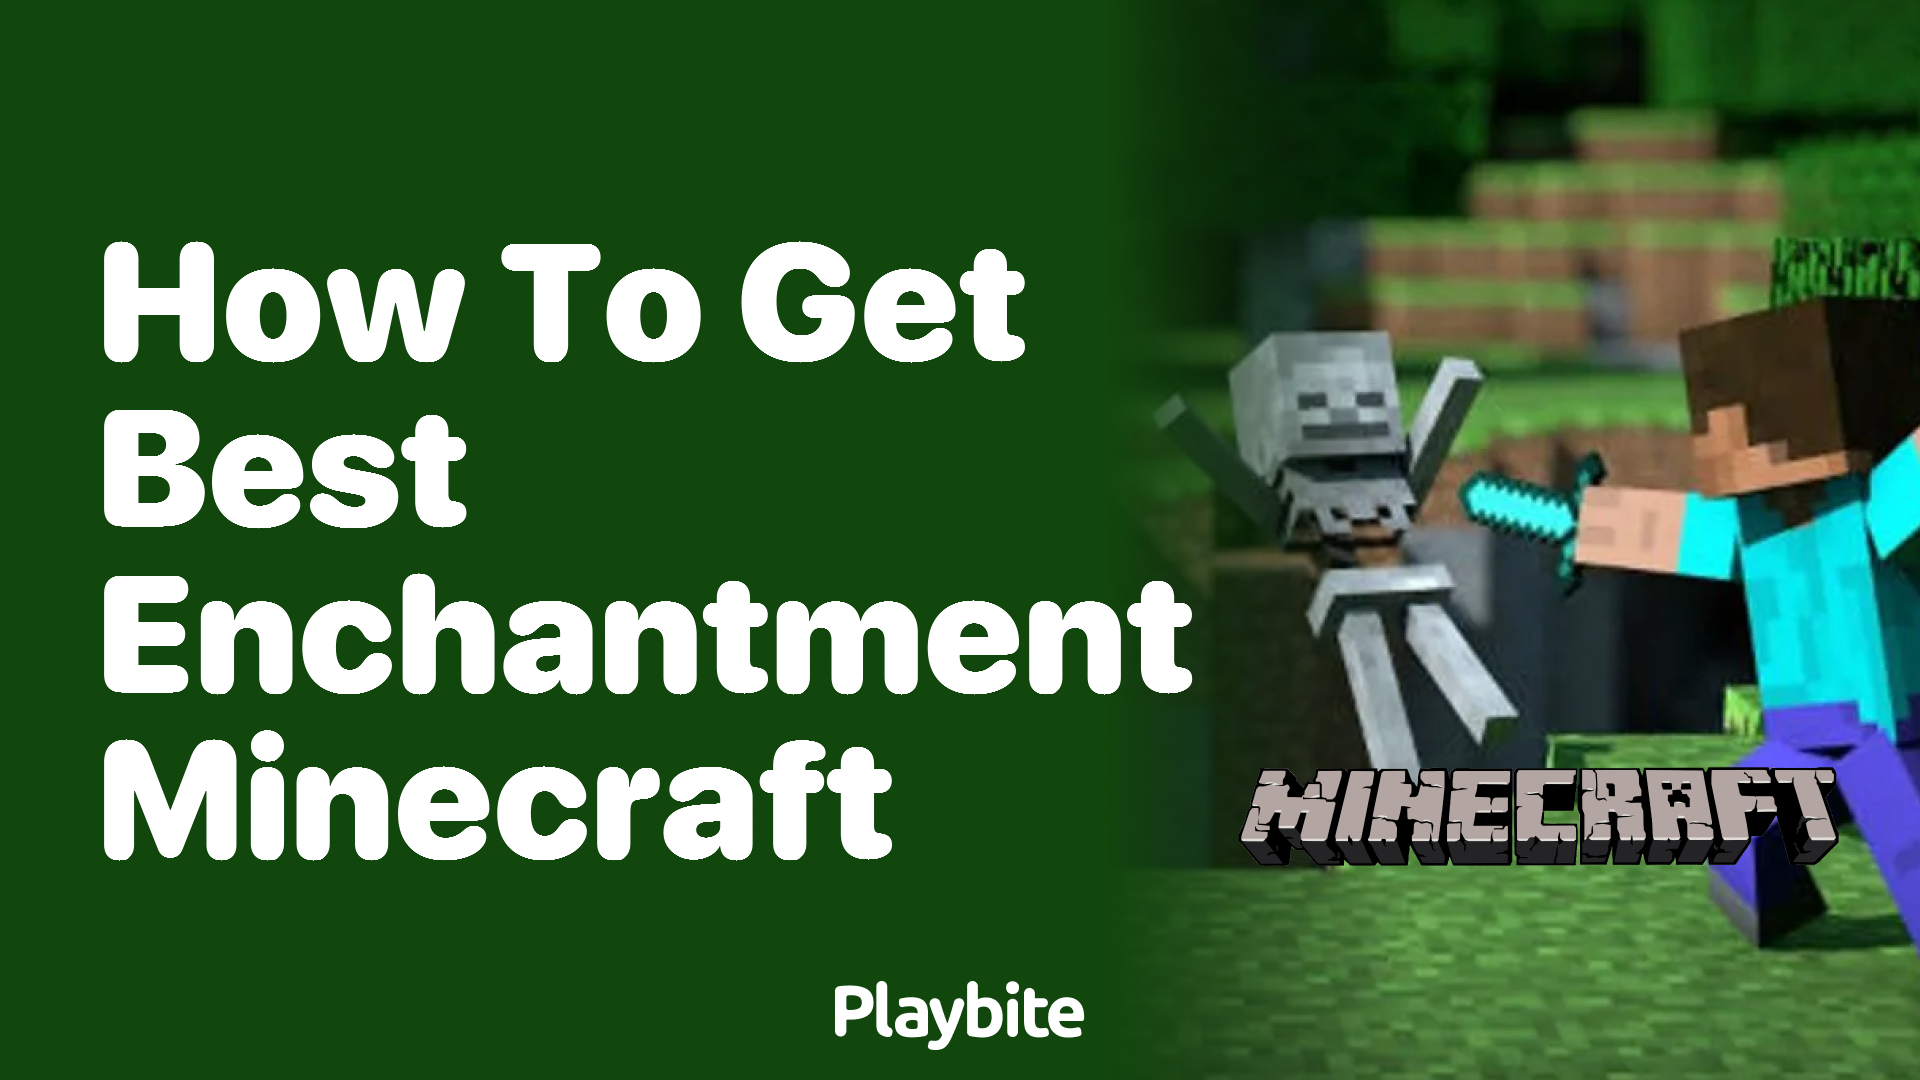 How to Get the Best Enchantment in Minecraft - Playbite